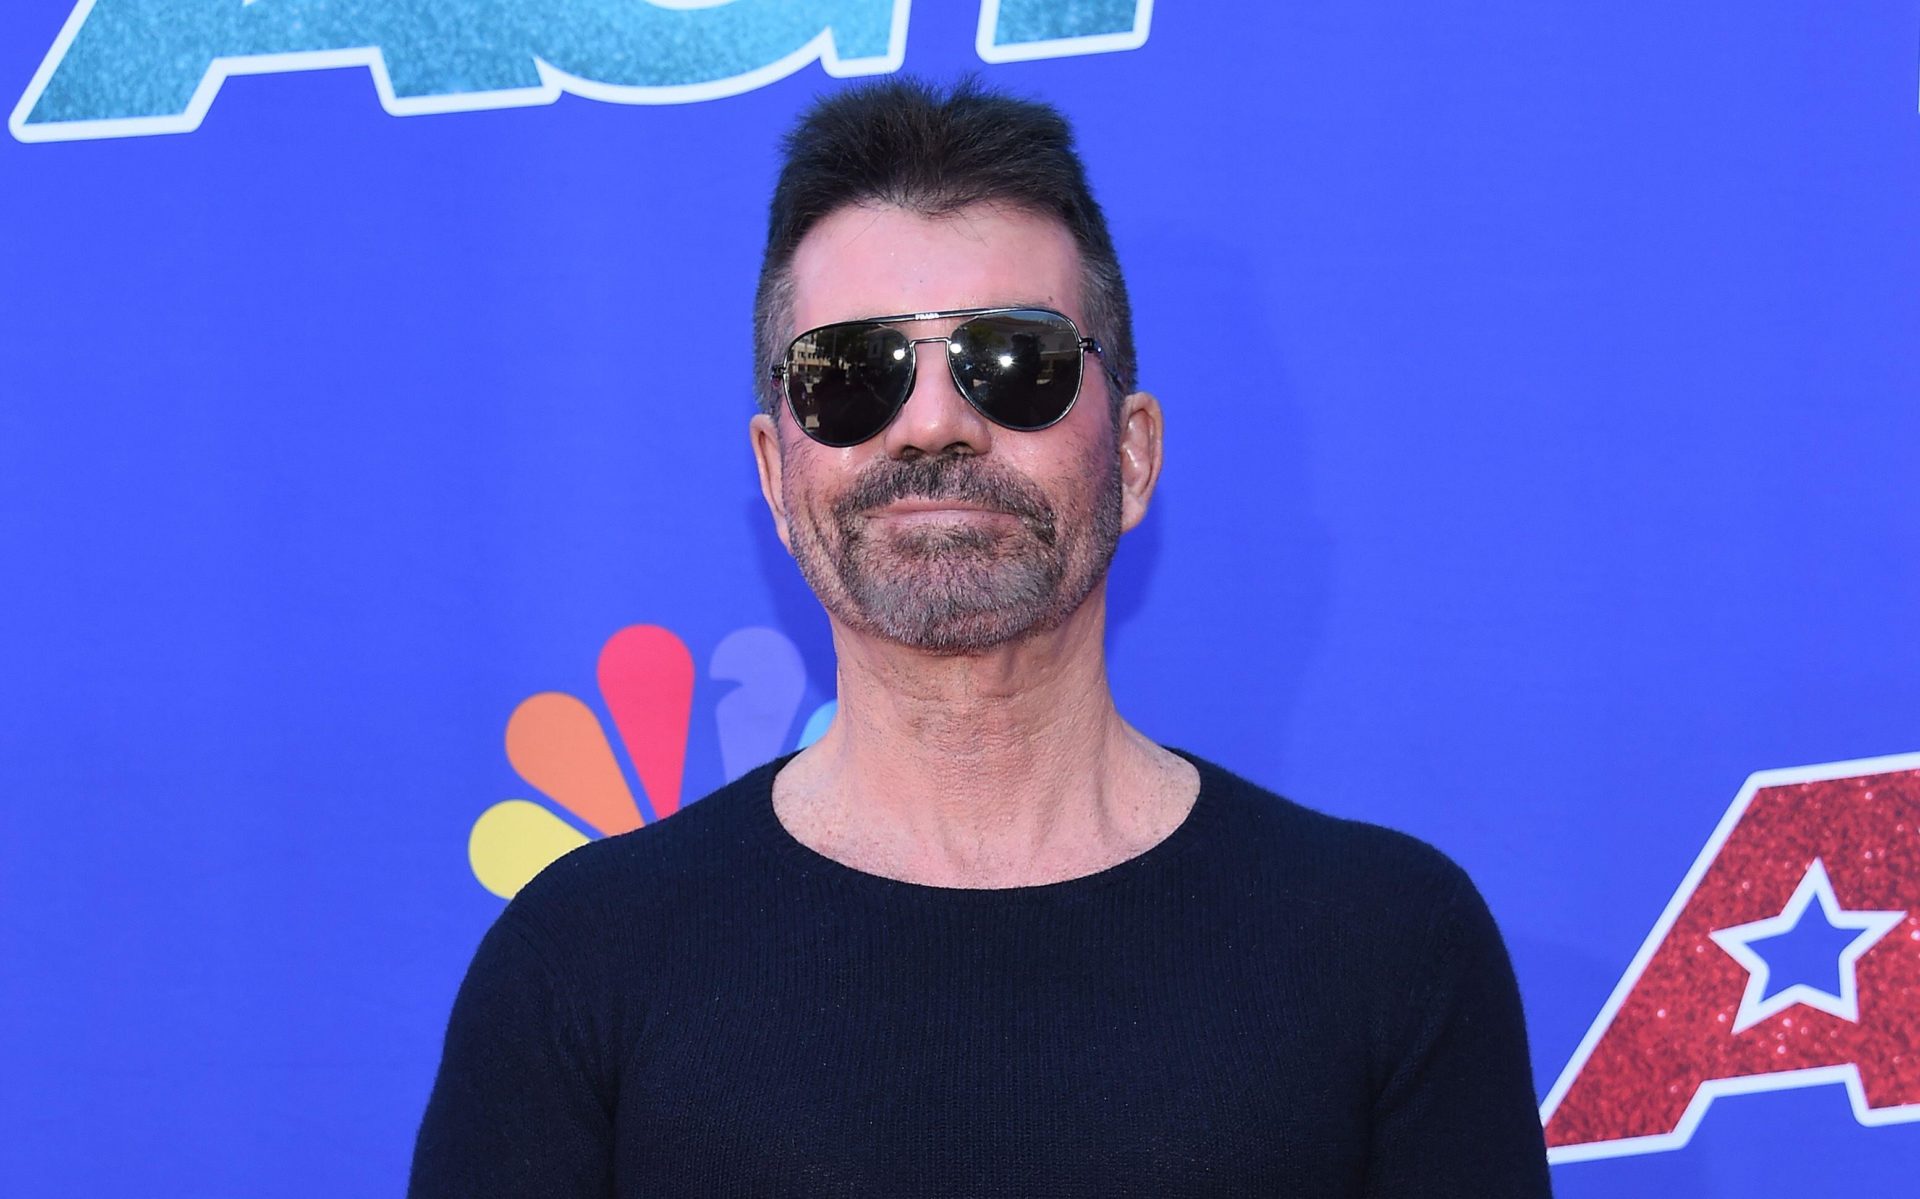 Simon Cowell arriving to an ‘America’s Got Talent’ event in California, 4-4-23. 